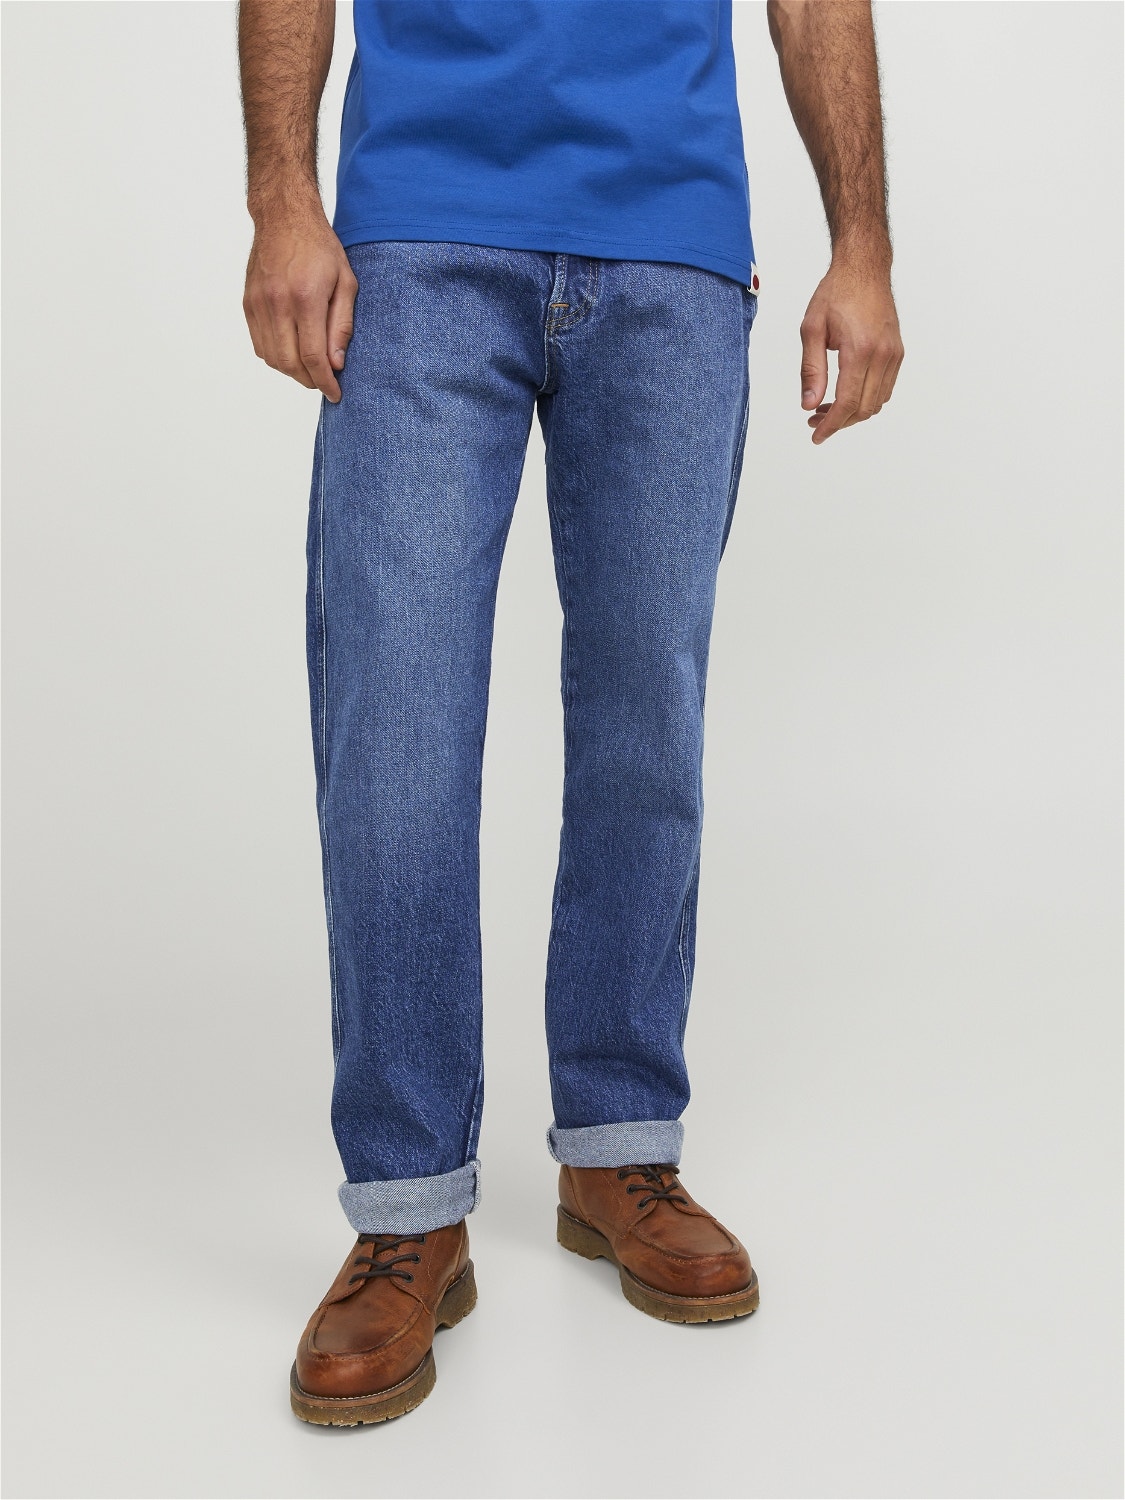 RDD Royal RE 391 Relaxed Fit Jeans, Medium Blue